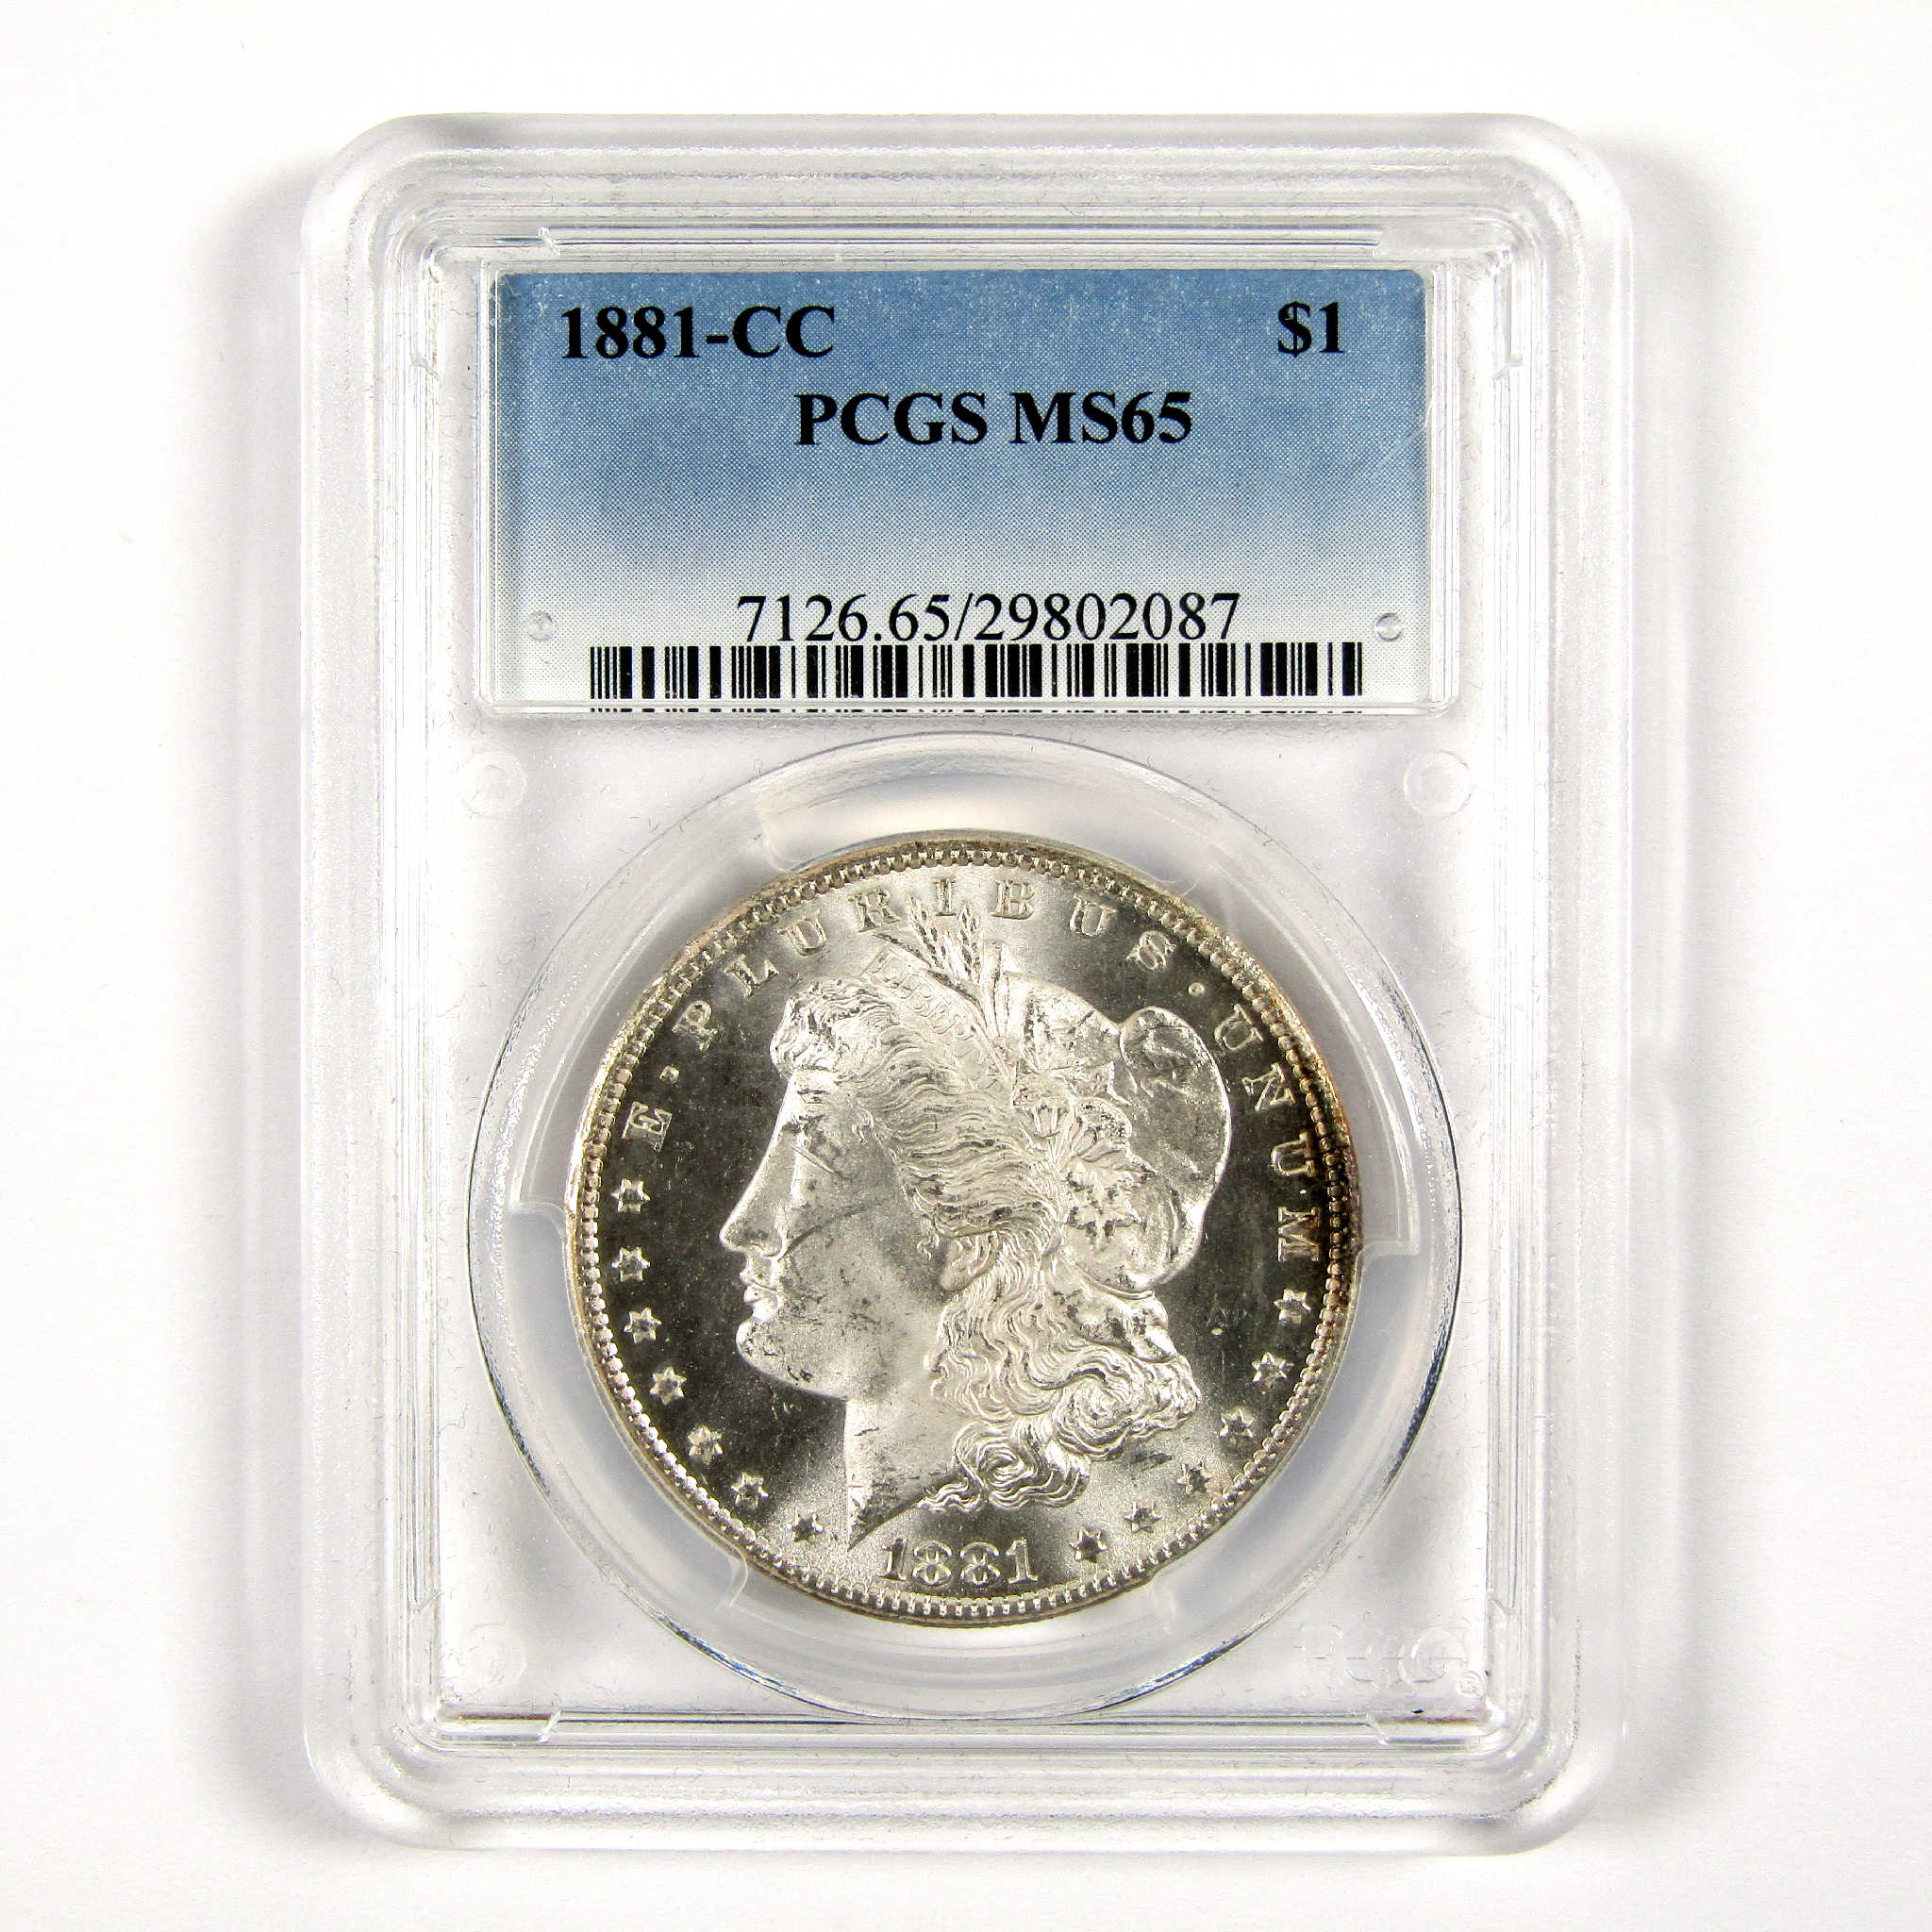 1881 CC Morgan Dollar MS 65 PCGS Silver $1 Uncirculated SKU:CPC6247 - Morgan coin - Morgan silver dollar - Morgan silver dollar for sale - Profile Coins &amp; Collectibles